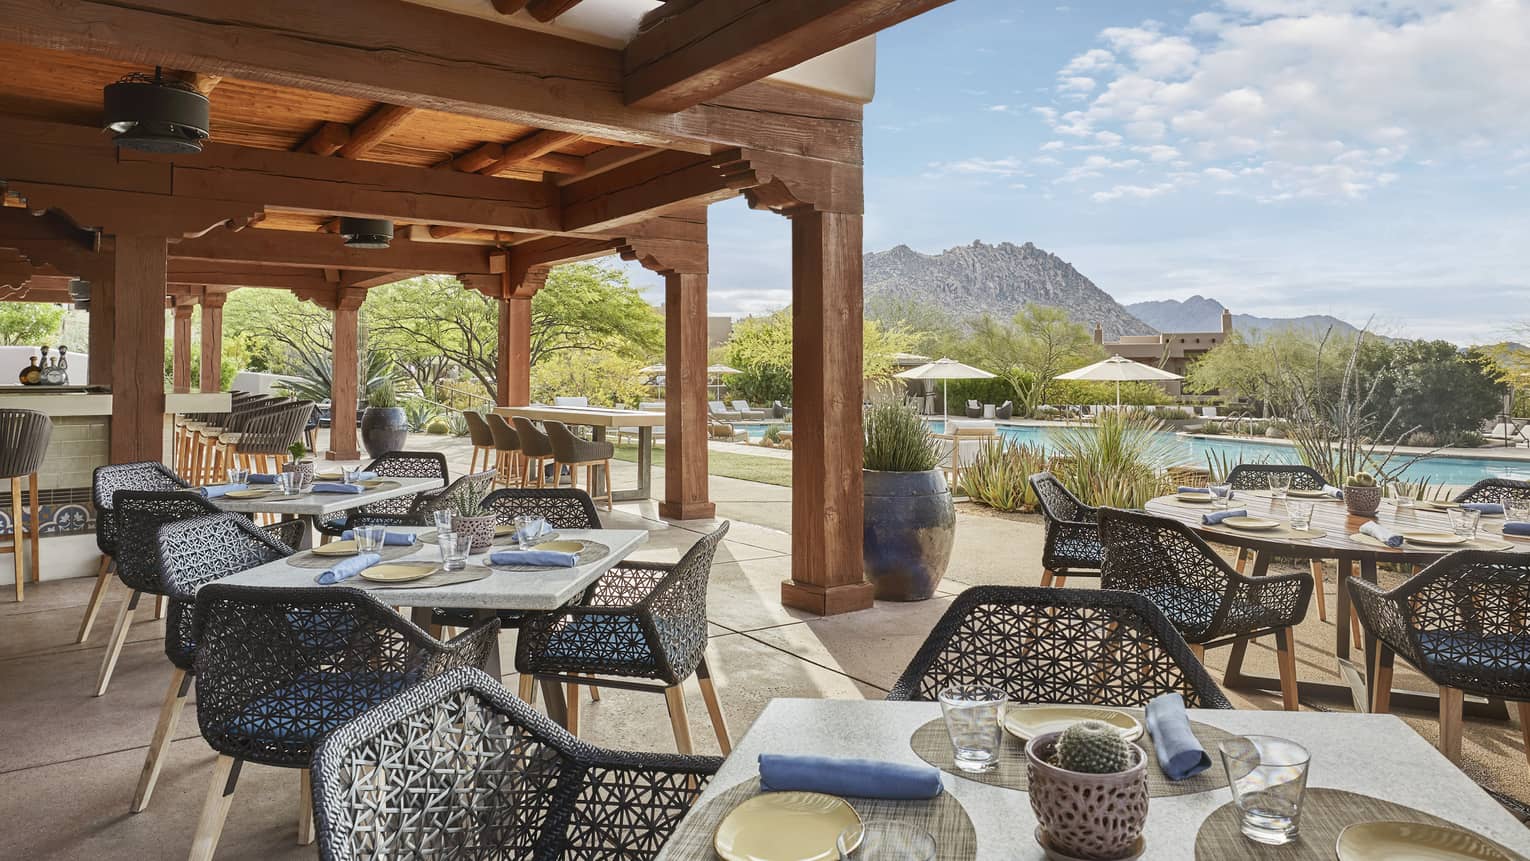 Outdoor restaurant patio with square tables, each with four dark blue wicker chairs, wooden pergola